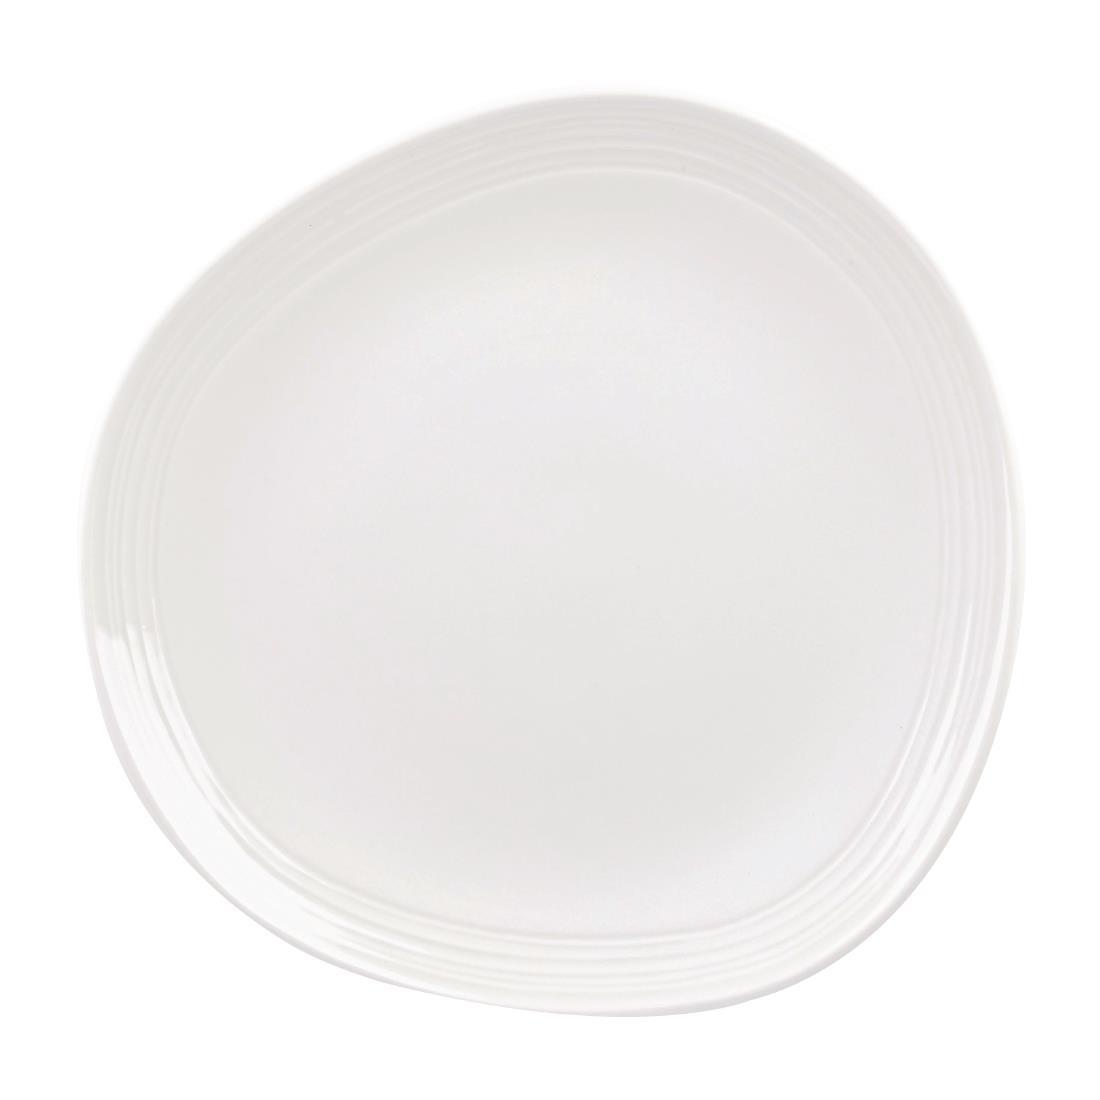 Churchill Discover Round Plates White 264mm (Pack of 12) - CS065  - 2